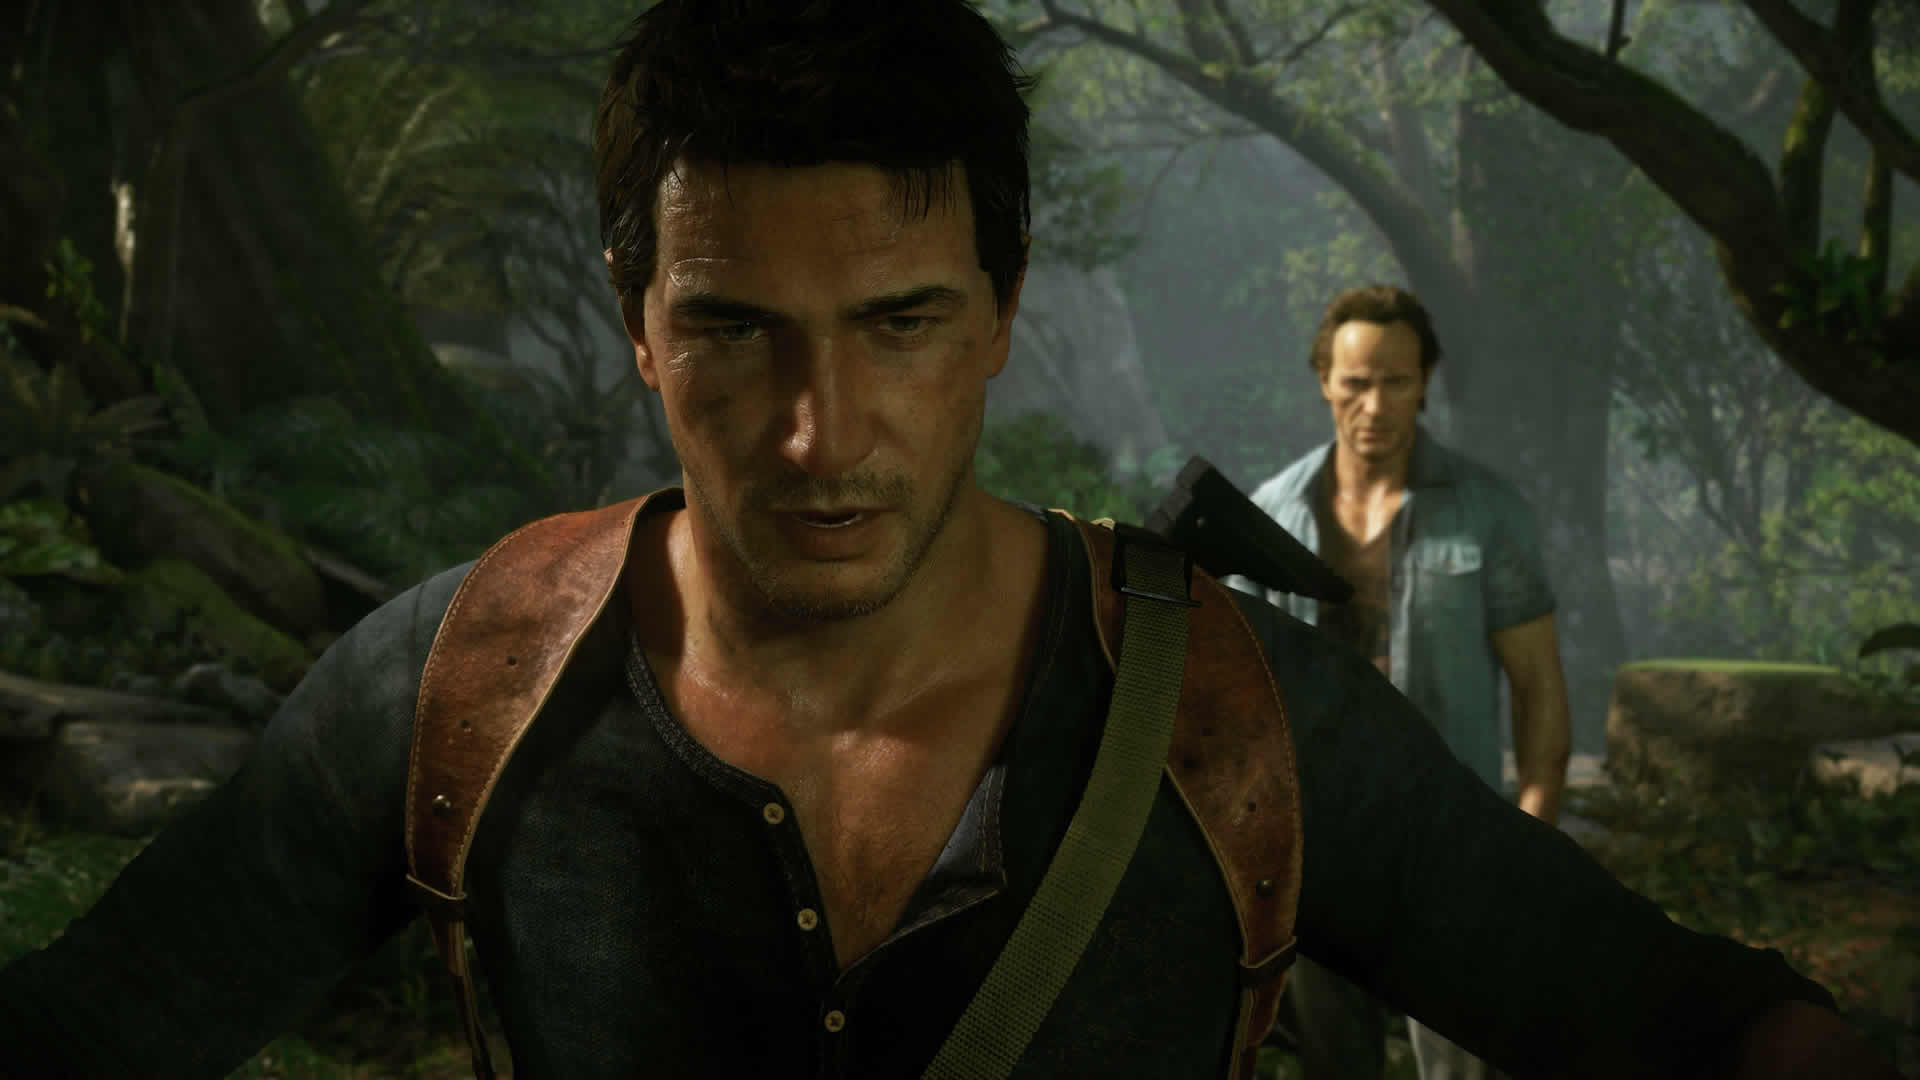 Review: Uncharted 4: A Thief's End (PS4)